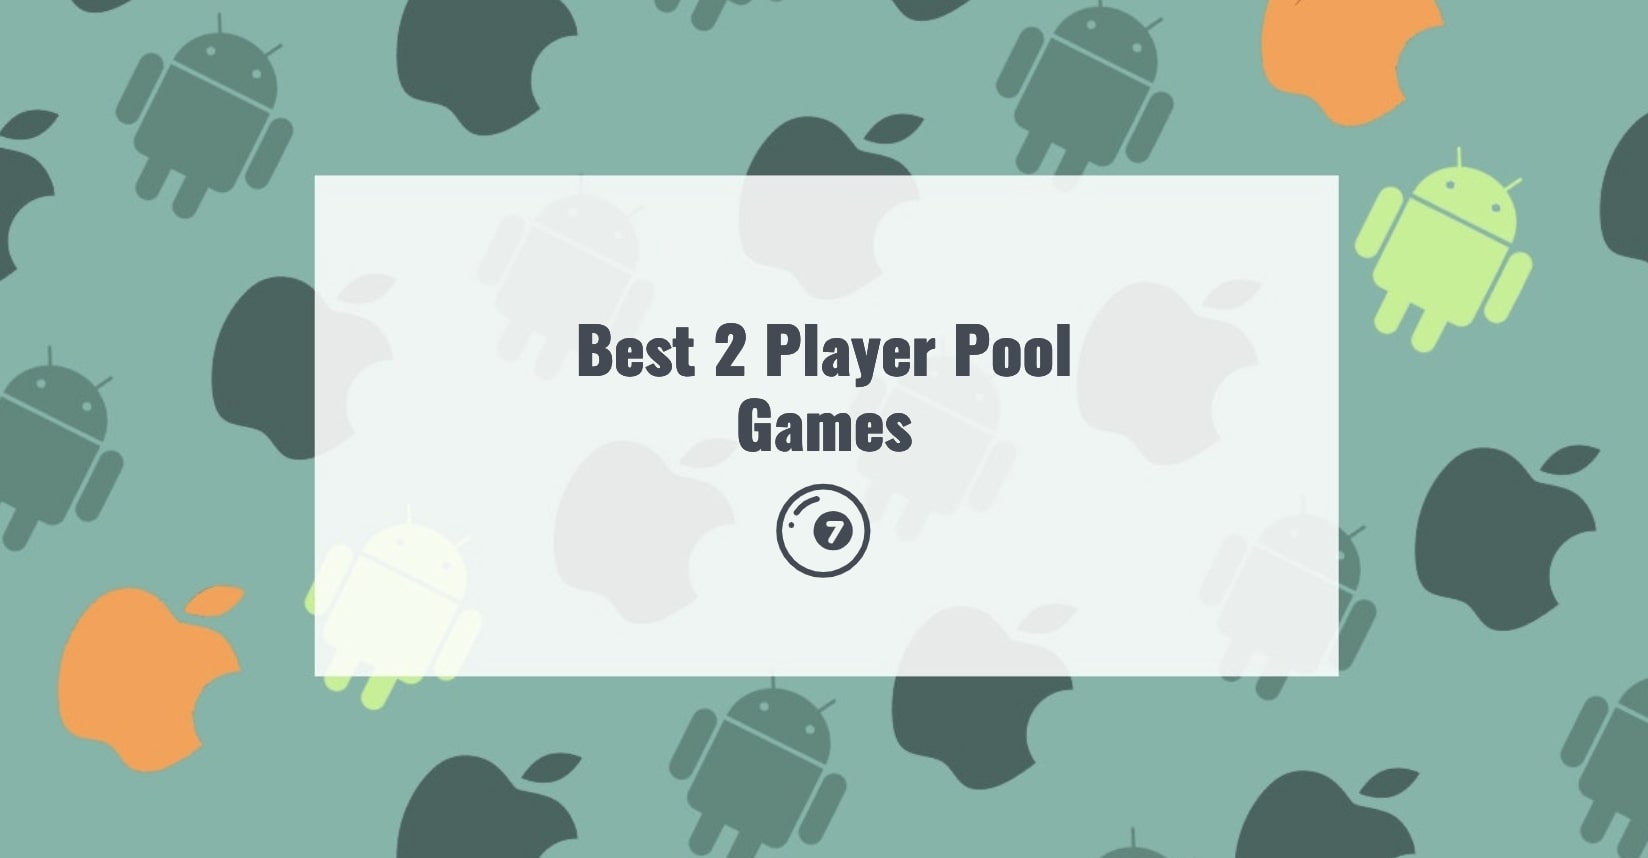 Best 2 Player Pool Games